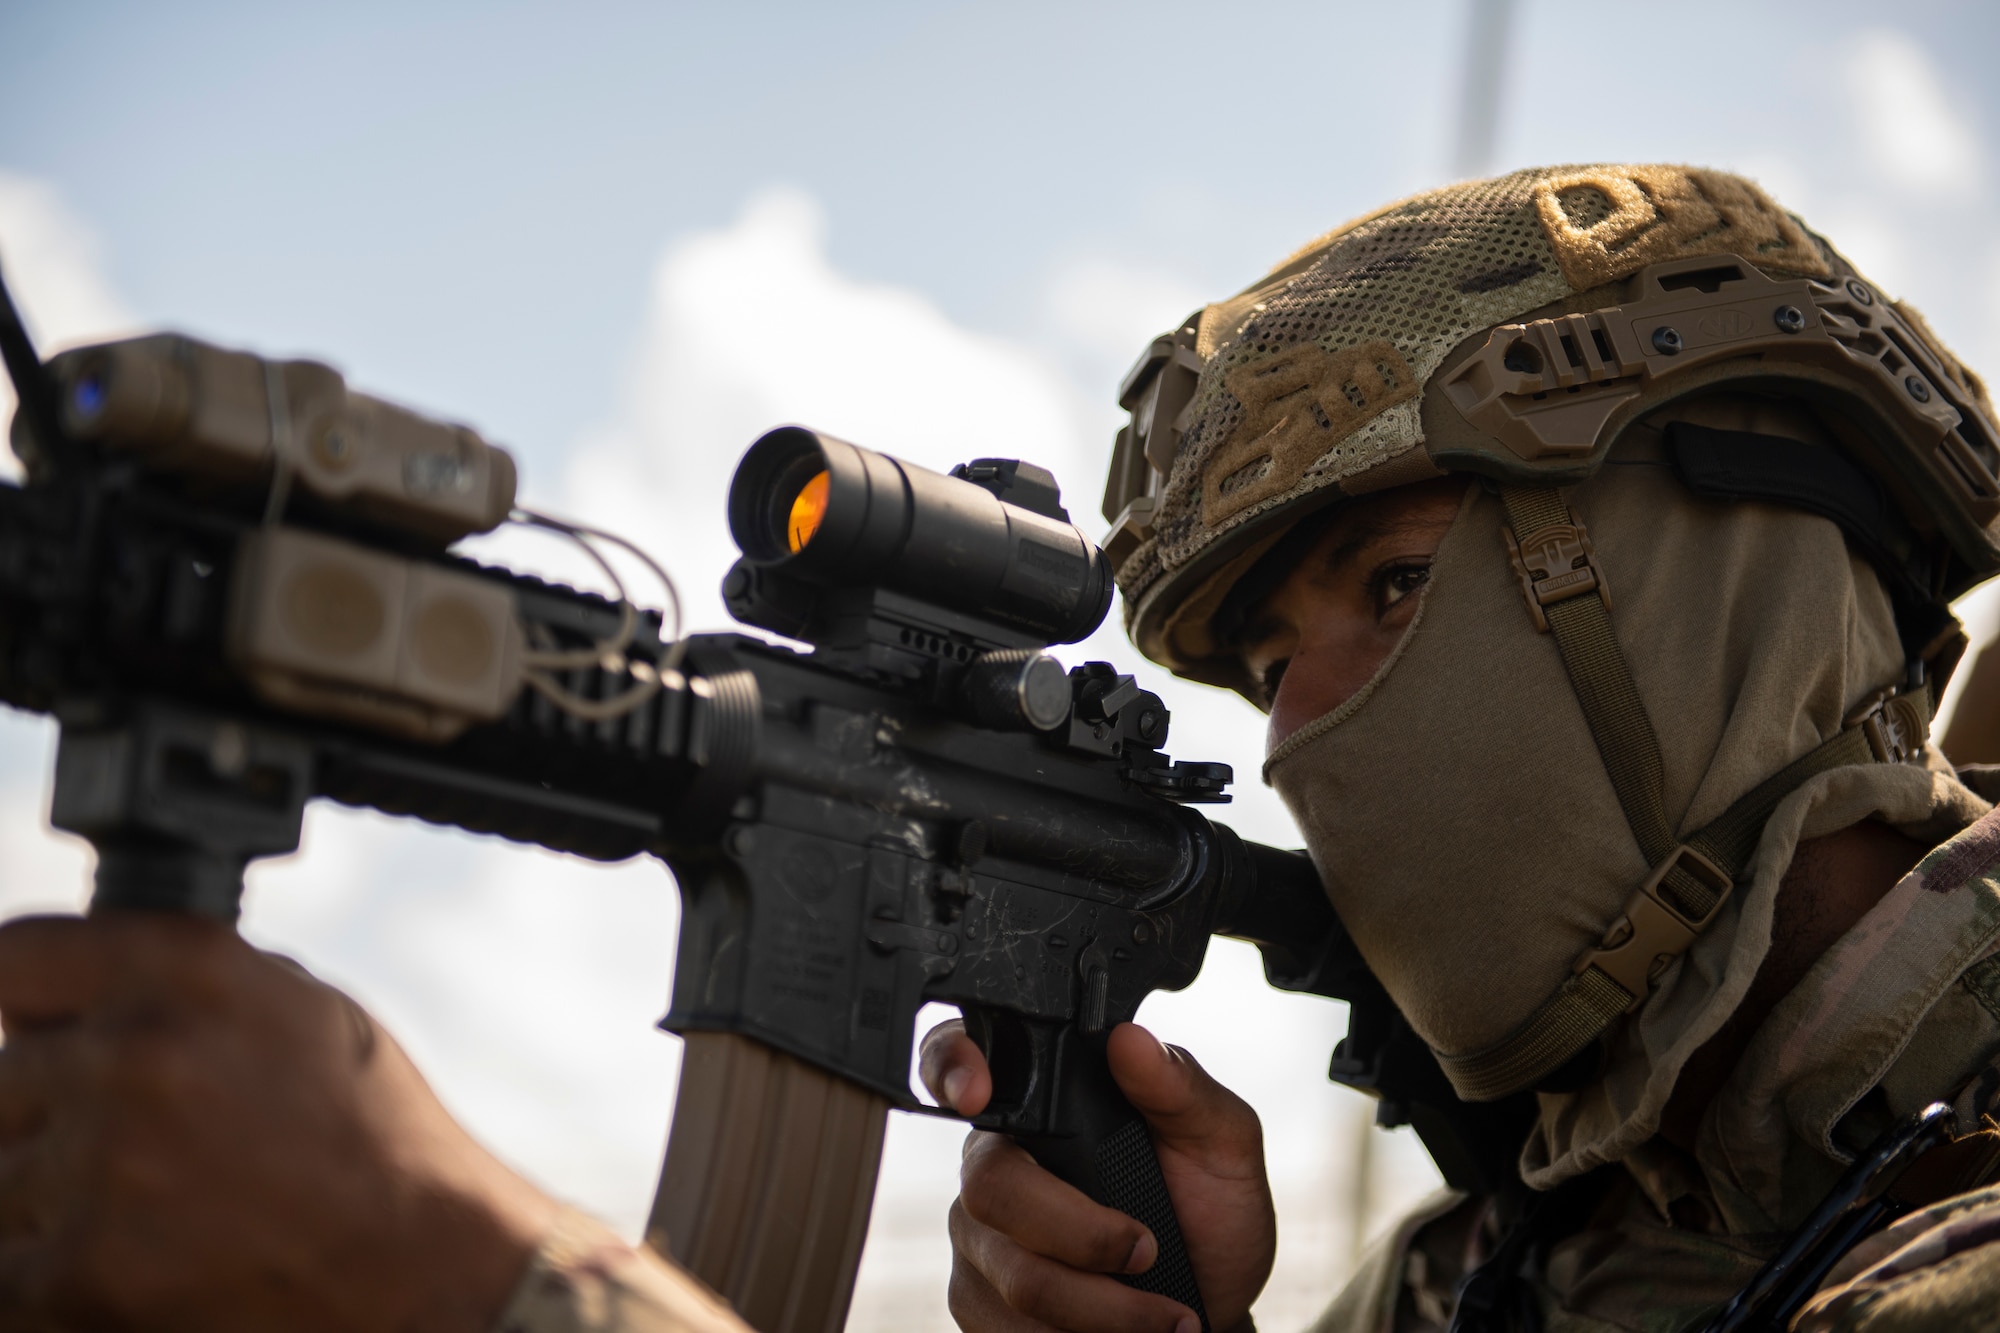 An up-close photo of an Airman holding an M-4 Carbine scope up to his eye.